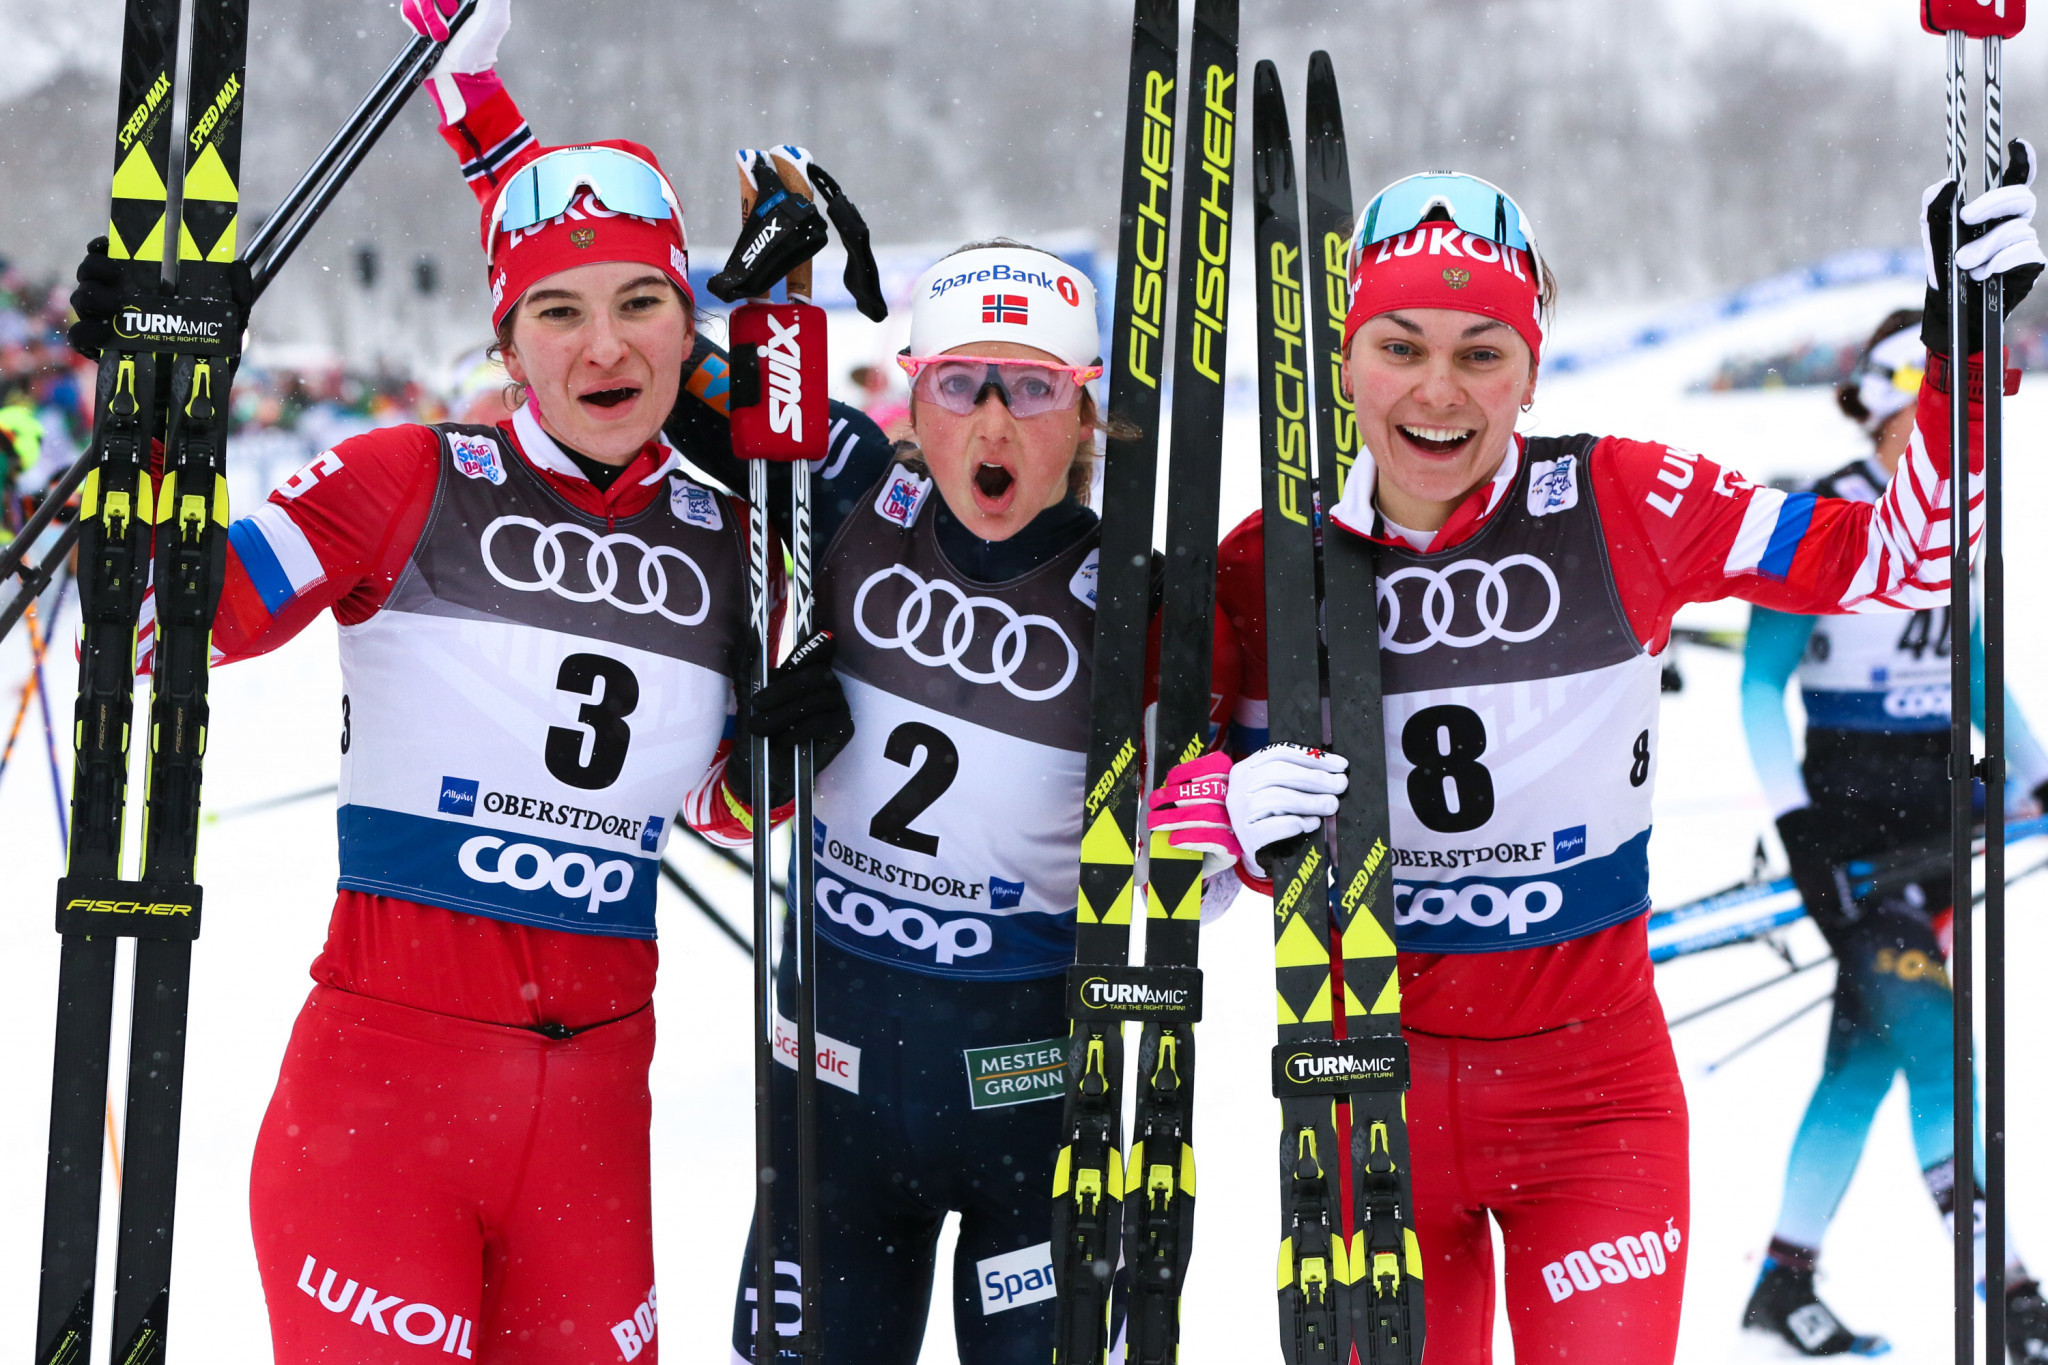 Ingvild Flugstad Østberg, centre, won the women's race in Oberstdorf to take the overall Tour de Ski lead ©Getty Images